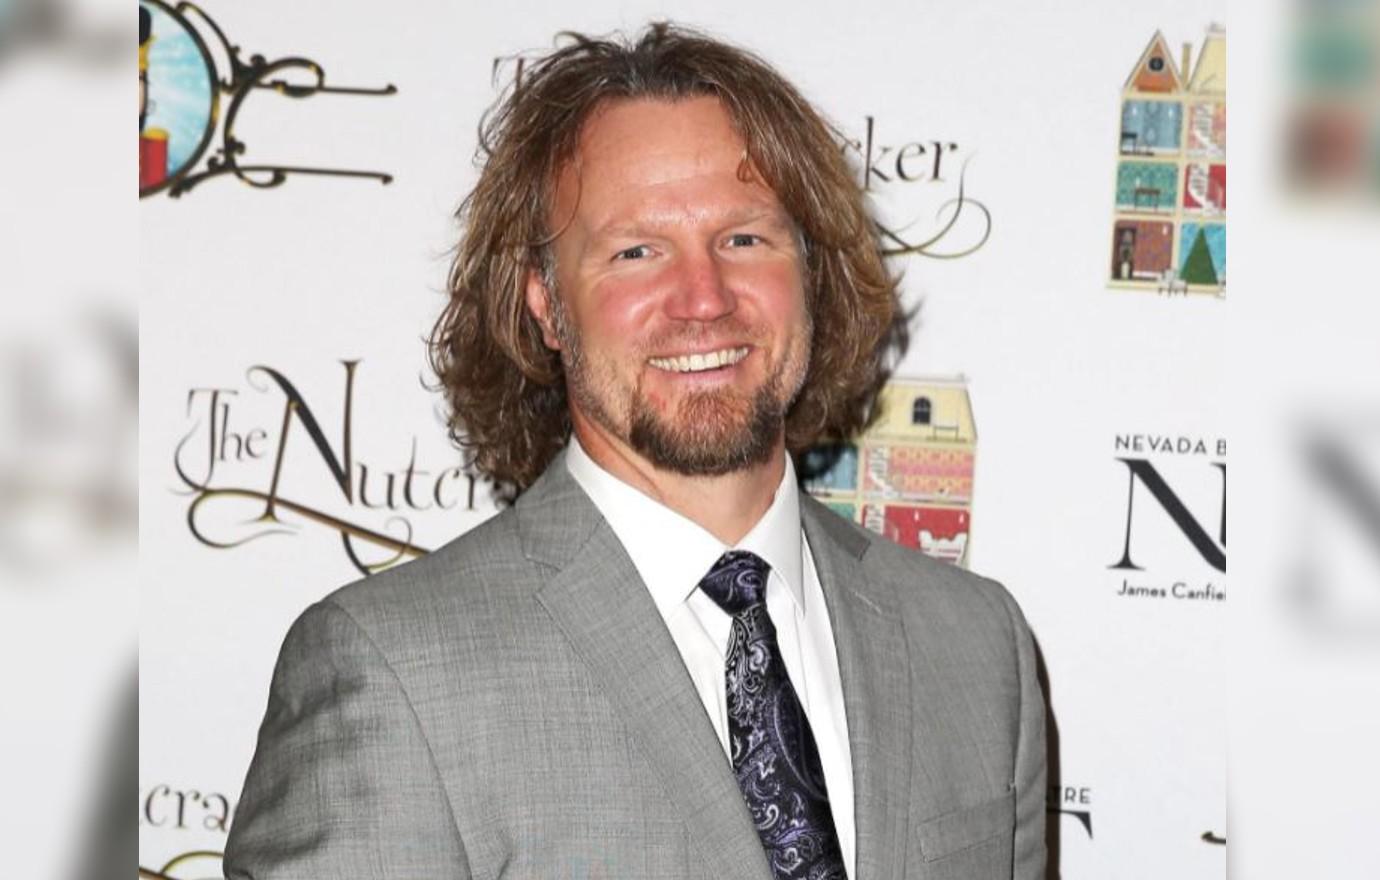 sister wives fans think kody brown may marry new wives for money